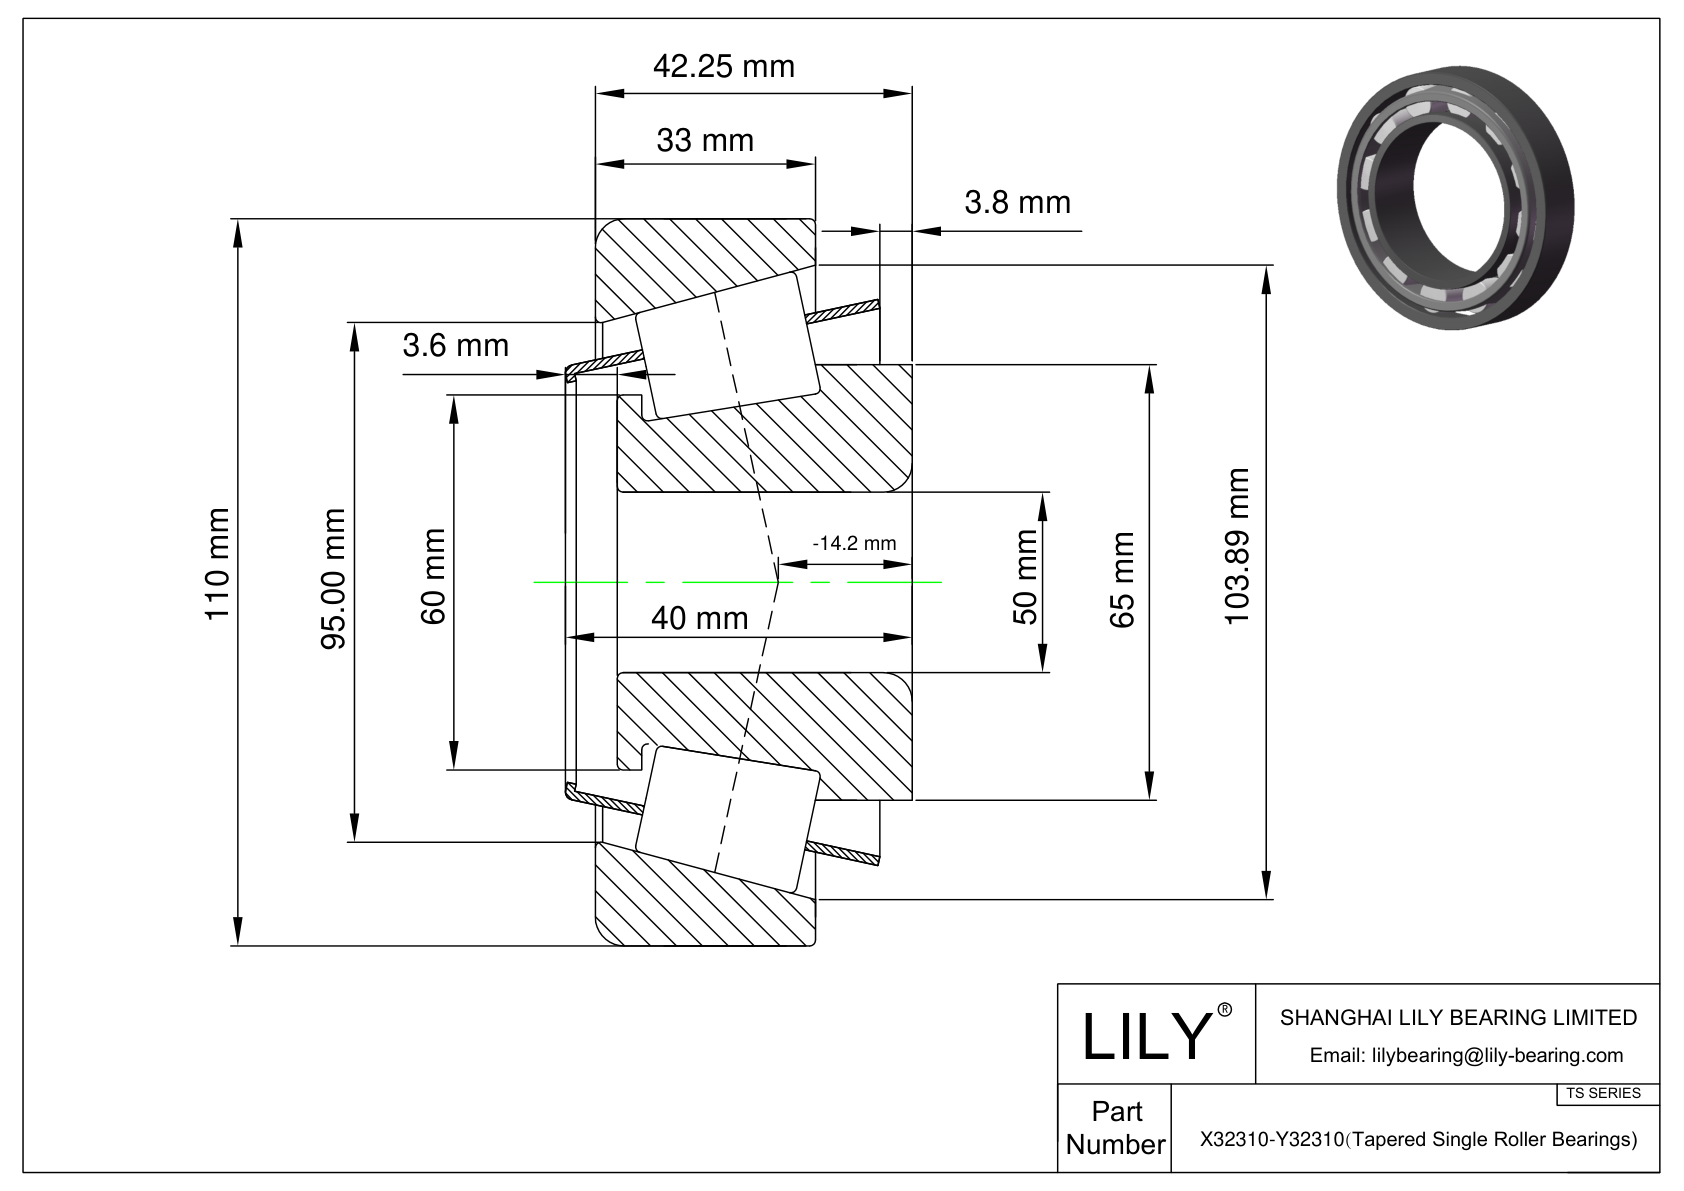 X32310-Y32310 TS (Tapered Single Roller Bearings) (Metric) cad drawing